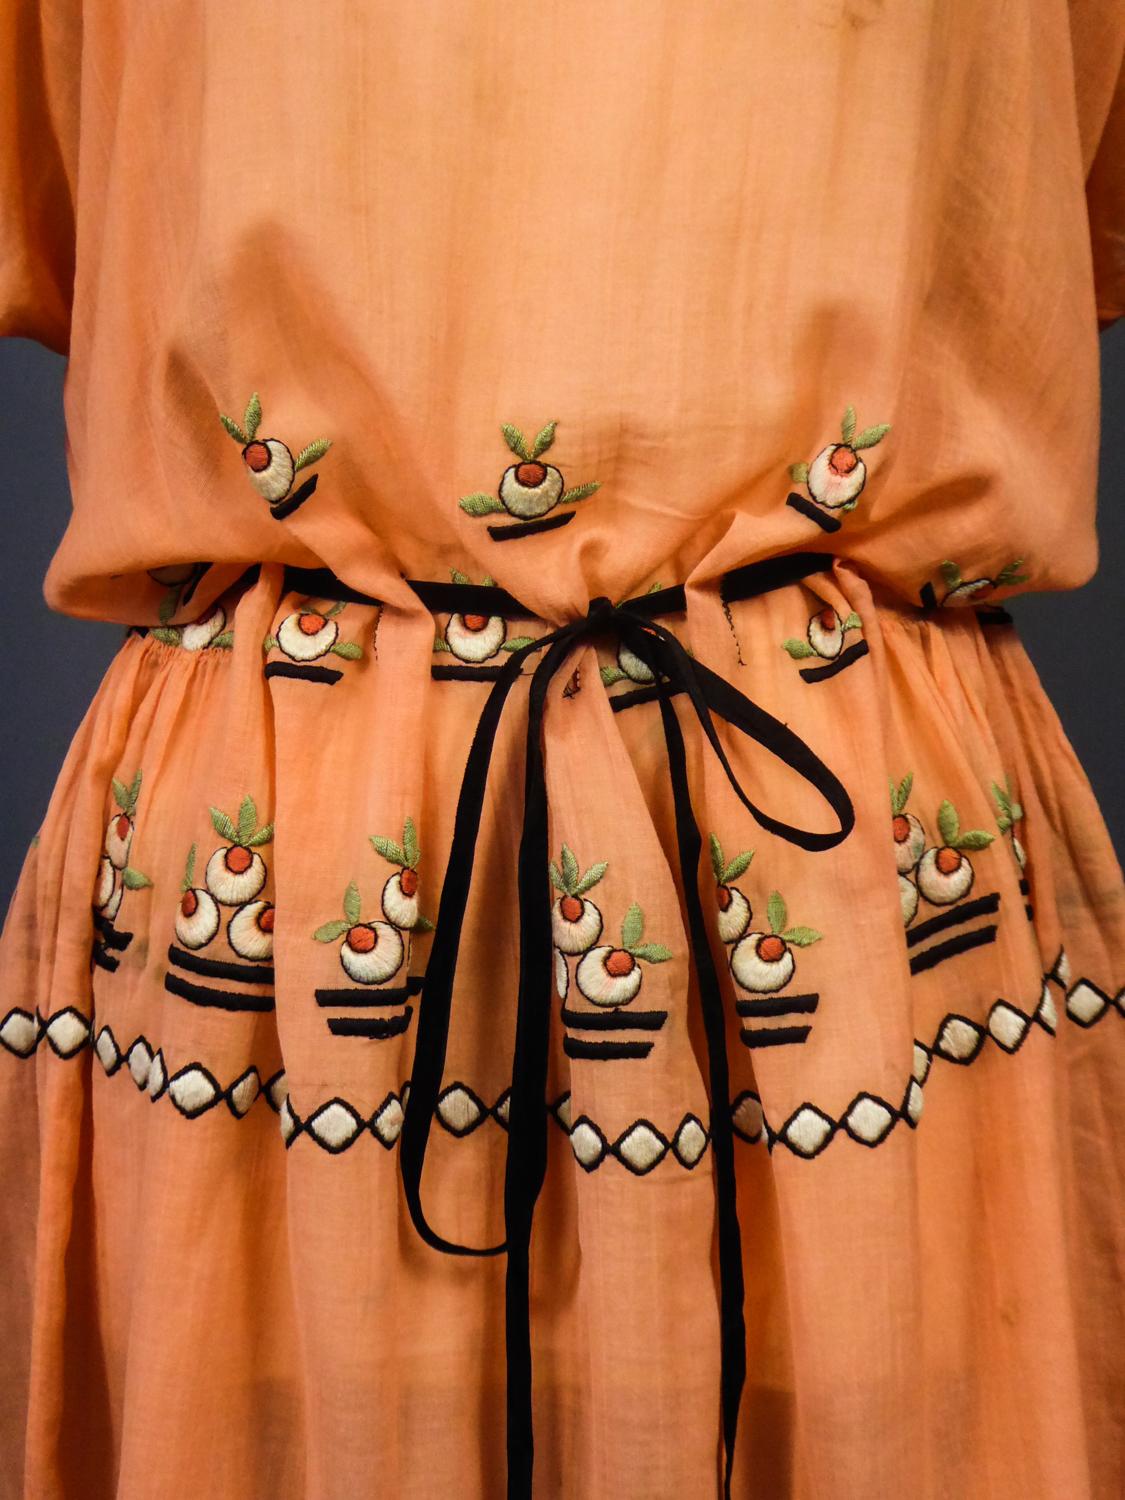 Orange A Seaside Embroidered Cotton Dress in the style of Atelier Martine Circa 1920 For Sale